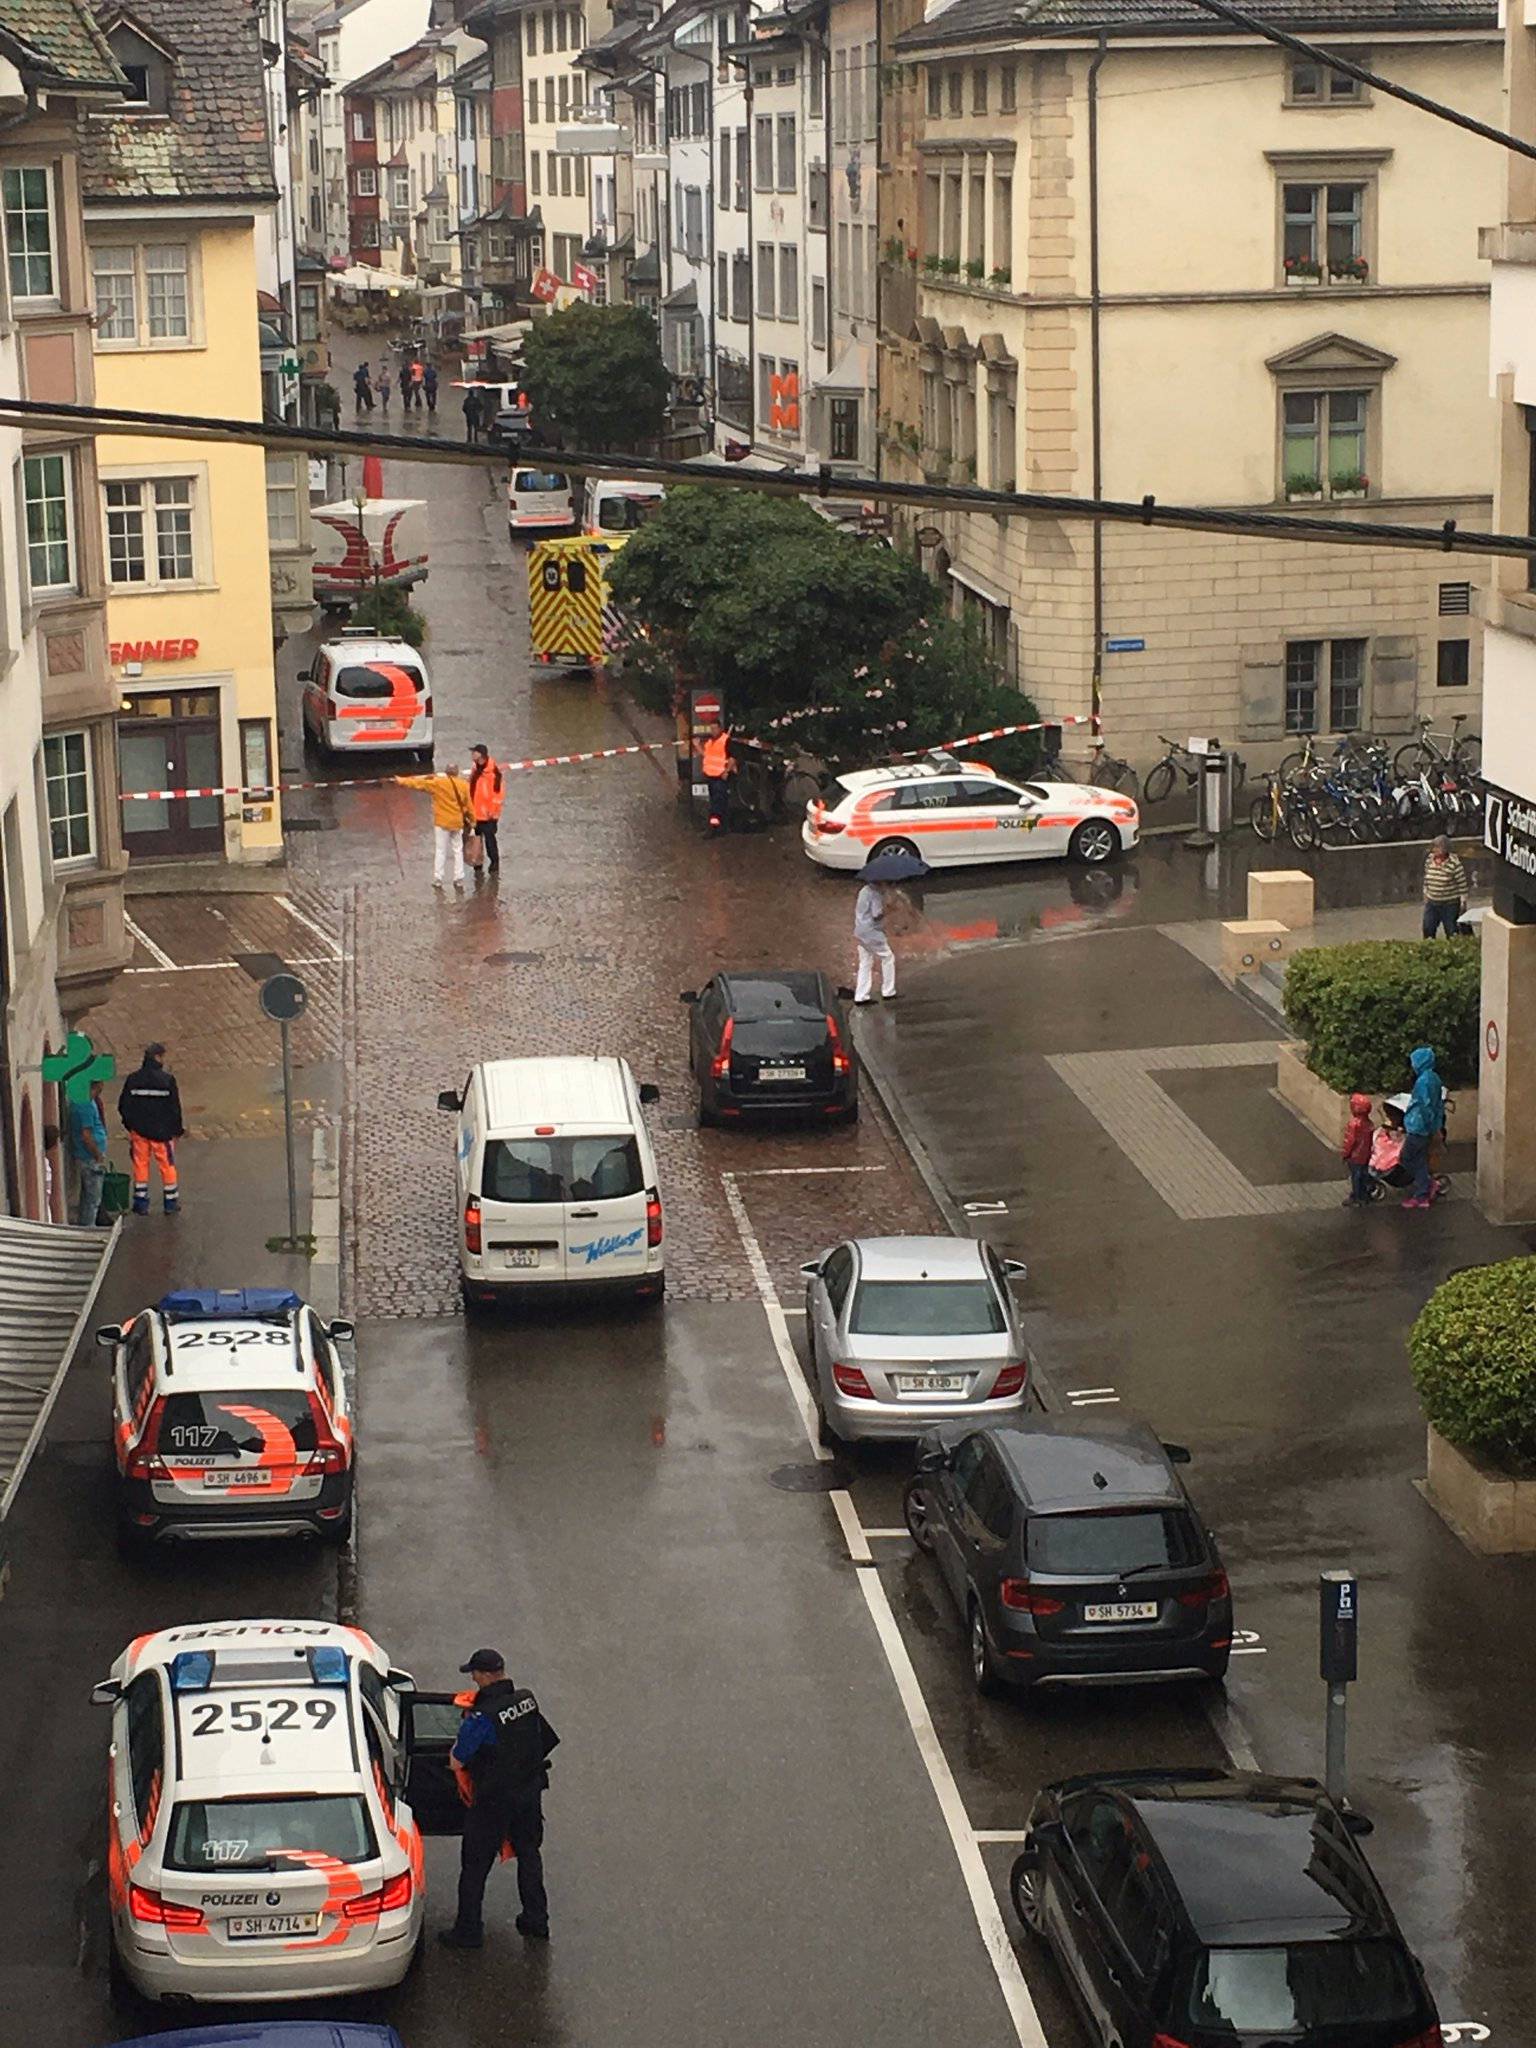 Picture shows a street cordoned off following an attack by an unidentified man in Schaffhausen